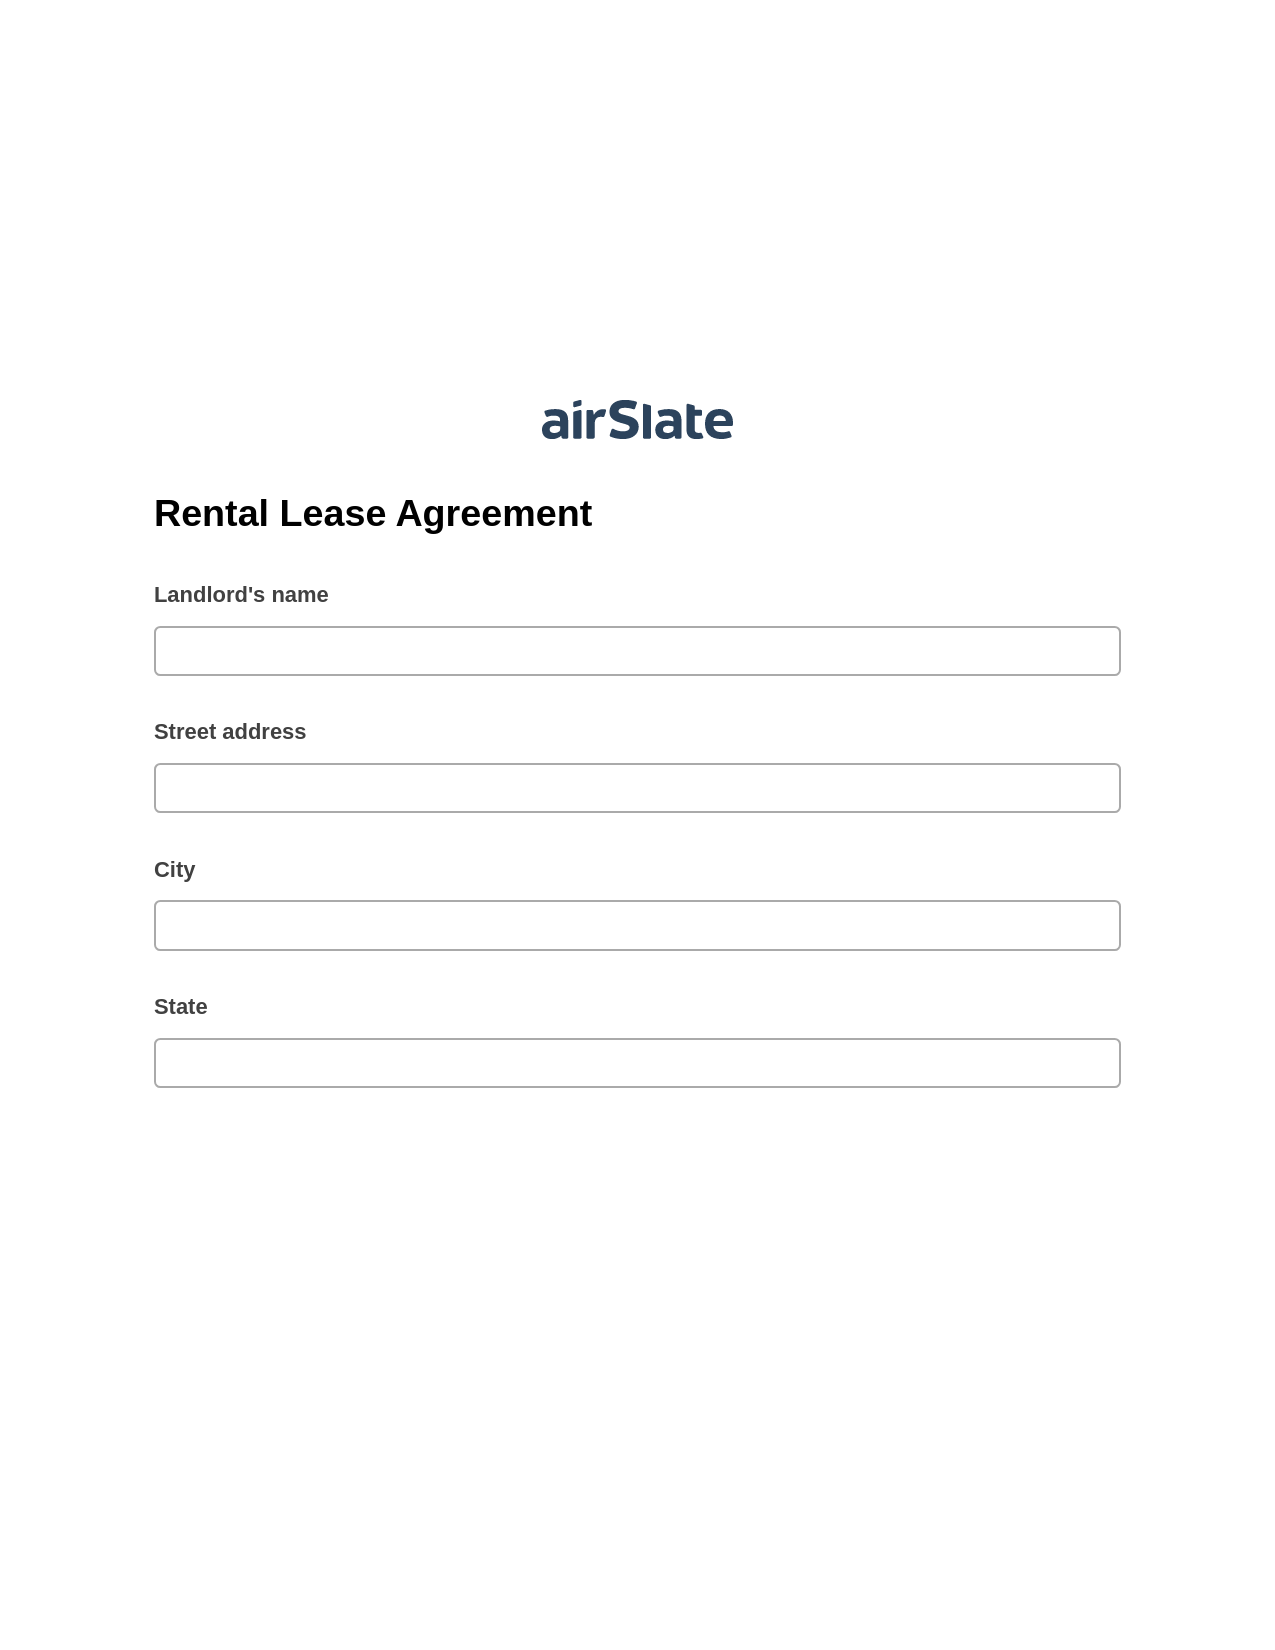 Rental Lease Agreement Pre-fill from another Slate Bot, Update NetSuite Records Bot, Export to NetSuite Record Bot